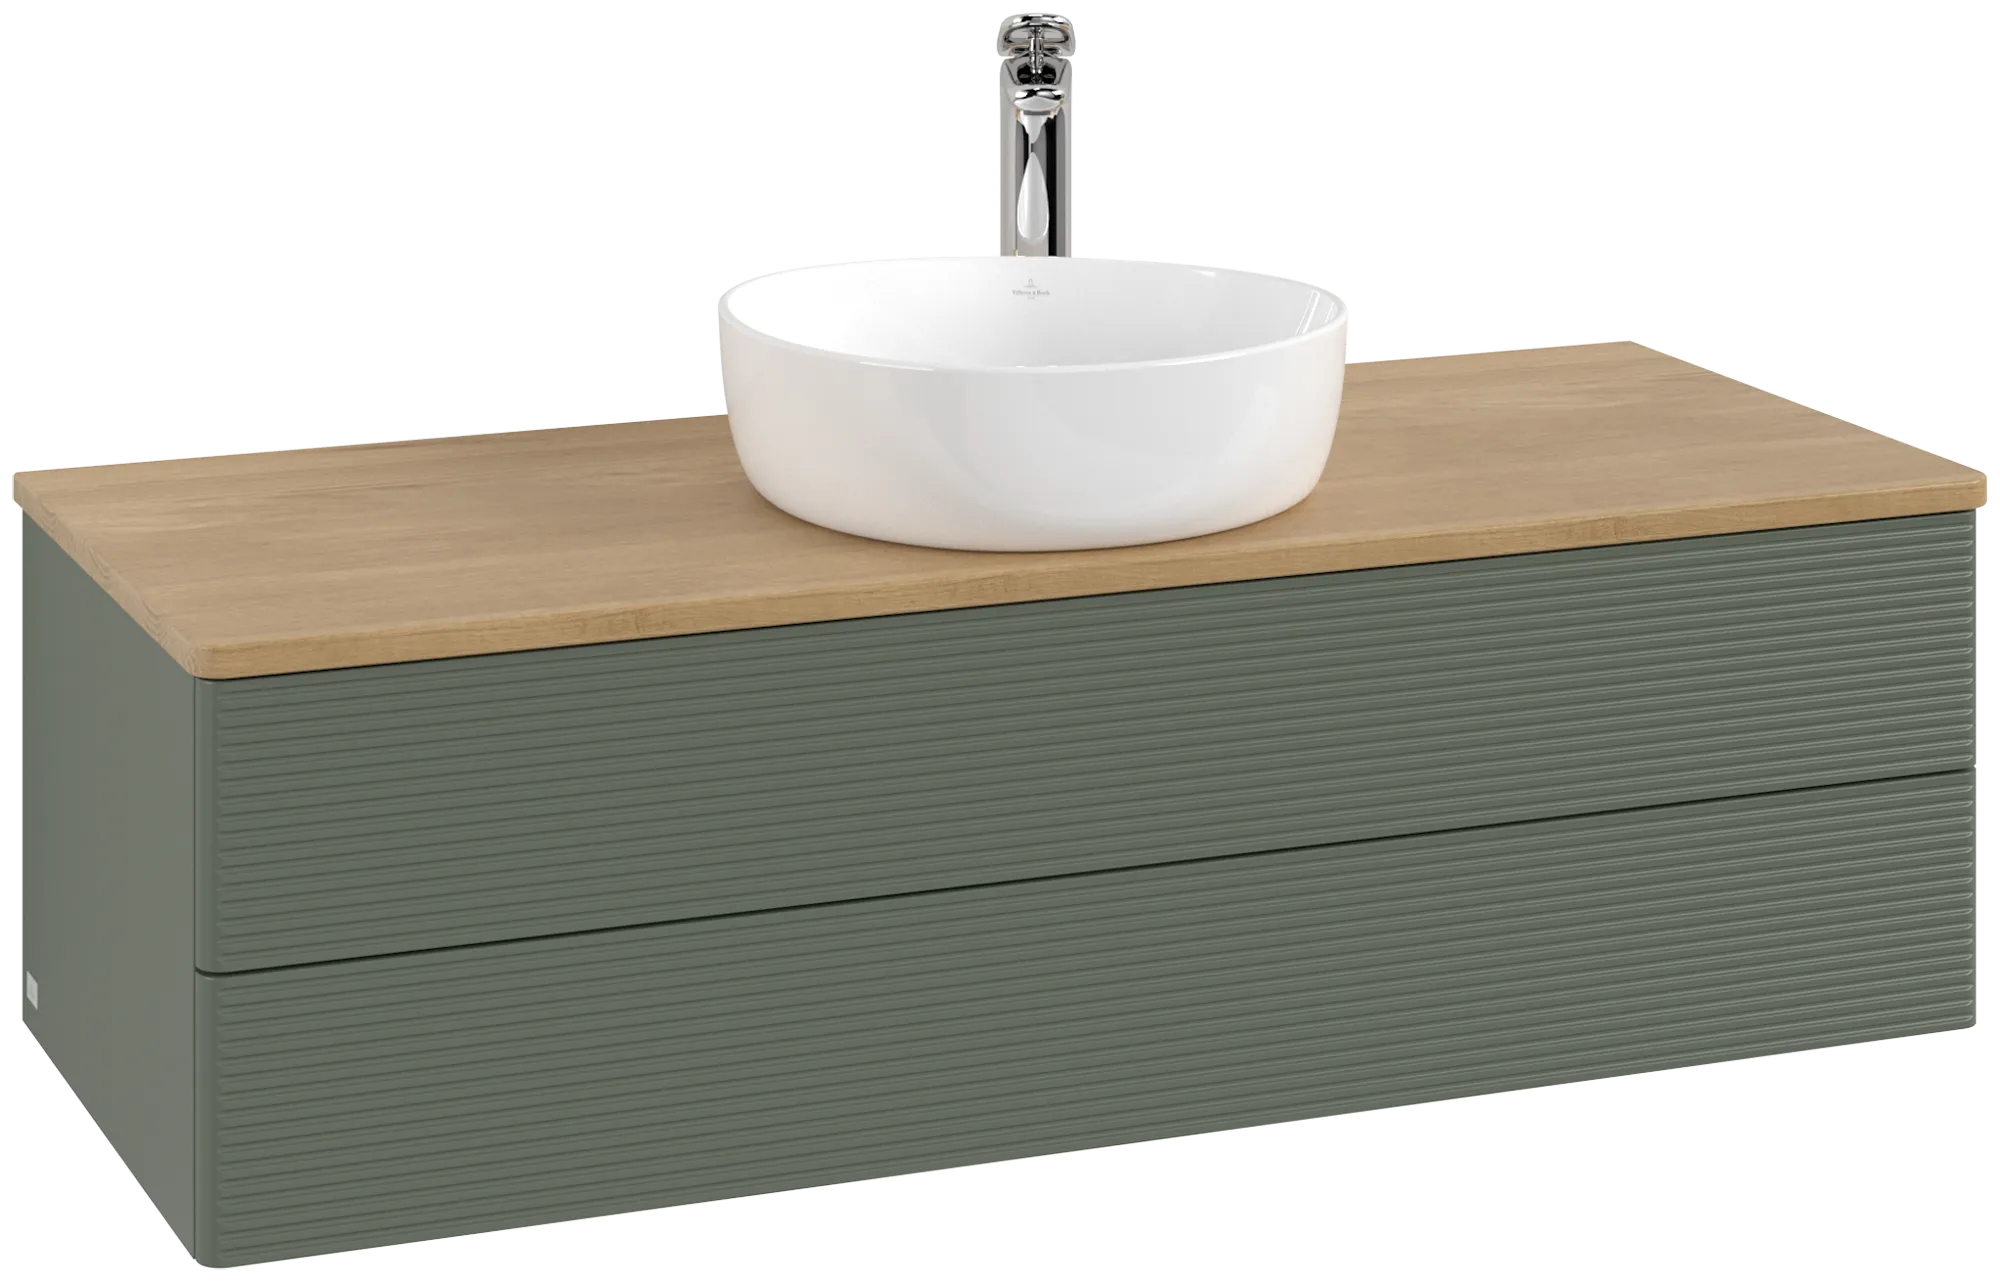 VILLEROY BOCH Antao Vanity unit, with lighting, 2 pull-out compartments, 1200 x 360 x 500 mm, Front with grain texture, Leaf Green Matt Lacquer / Honey Oak #L21151HL resmi